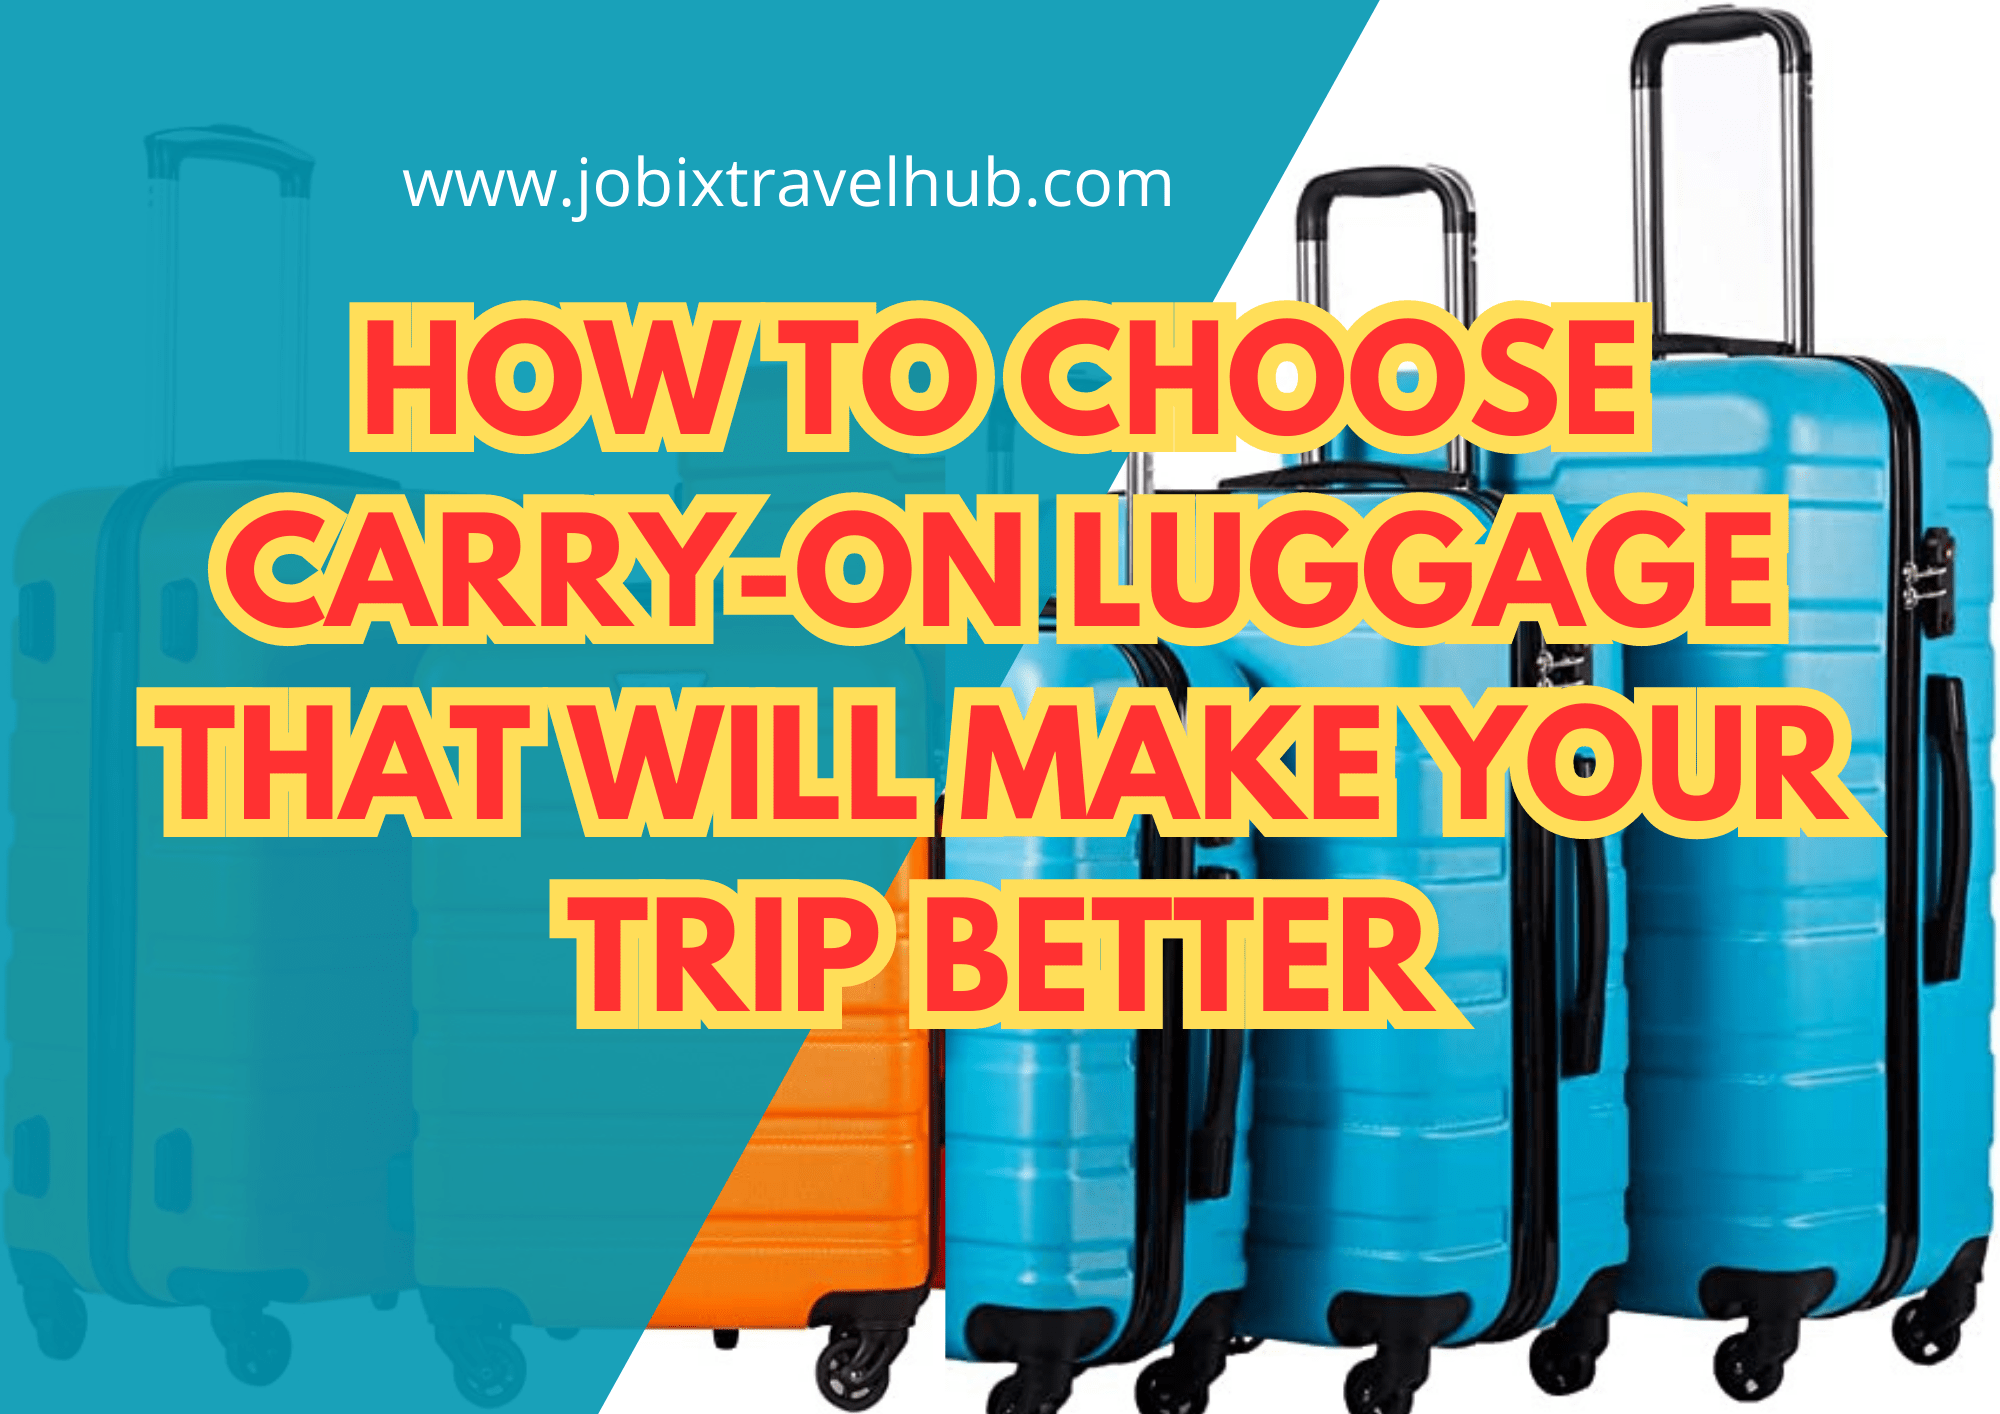 Are you searching for the best carry-on luggage to make your next flight a breeze? You're in luck!